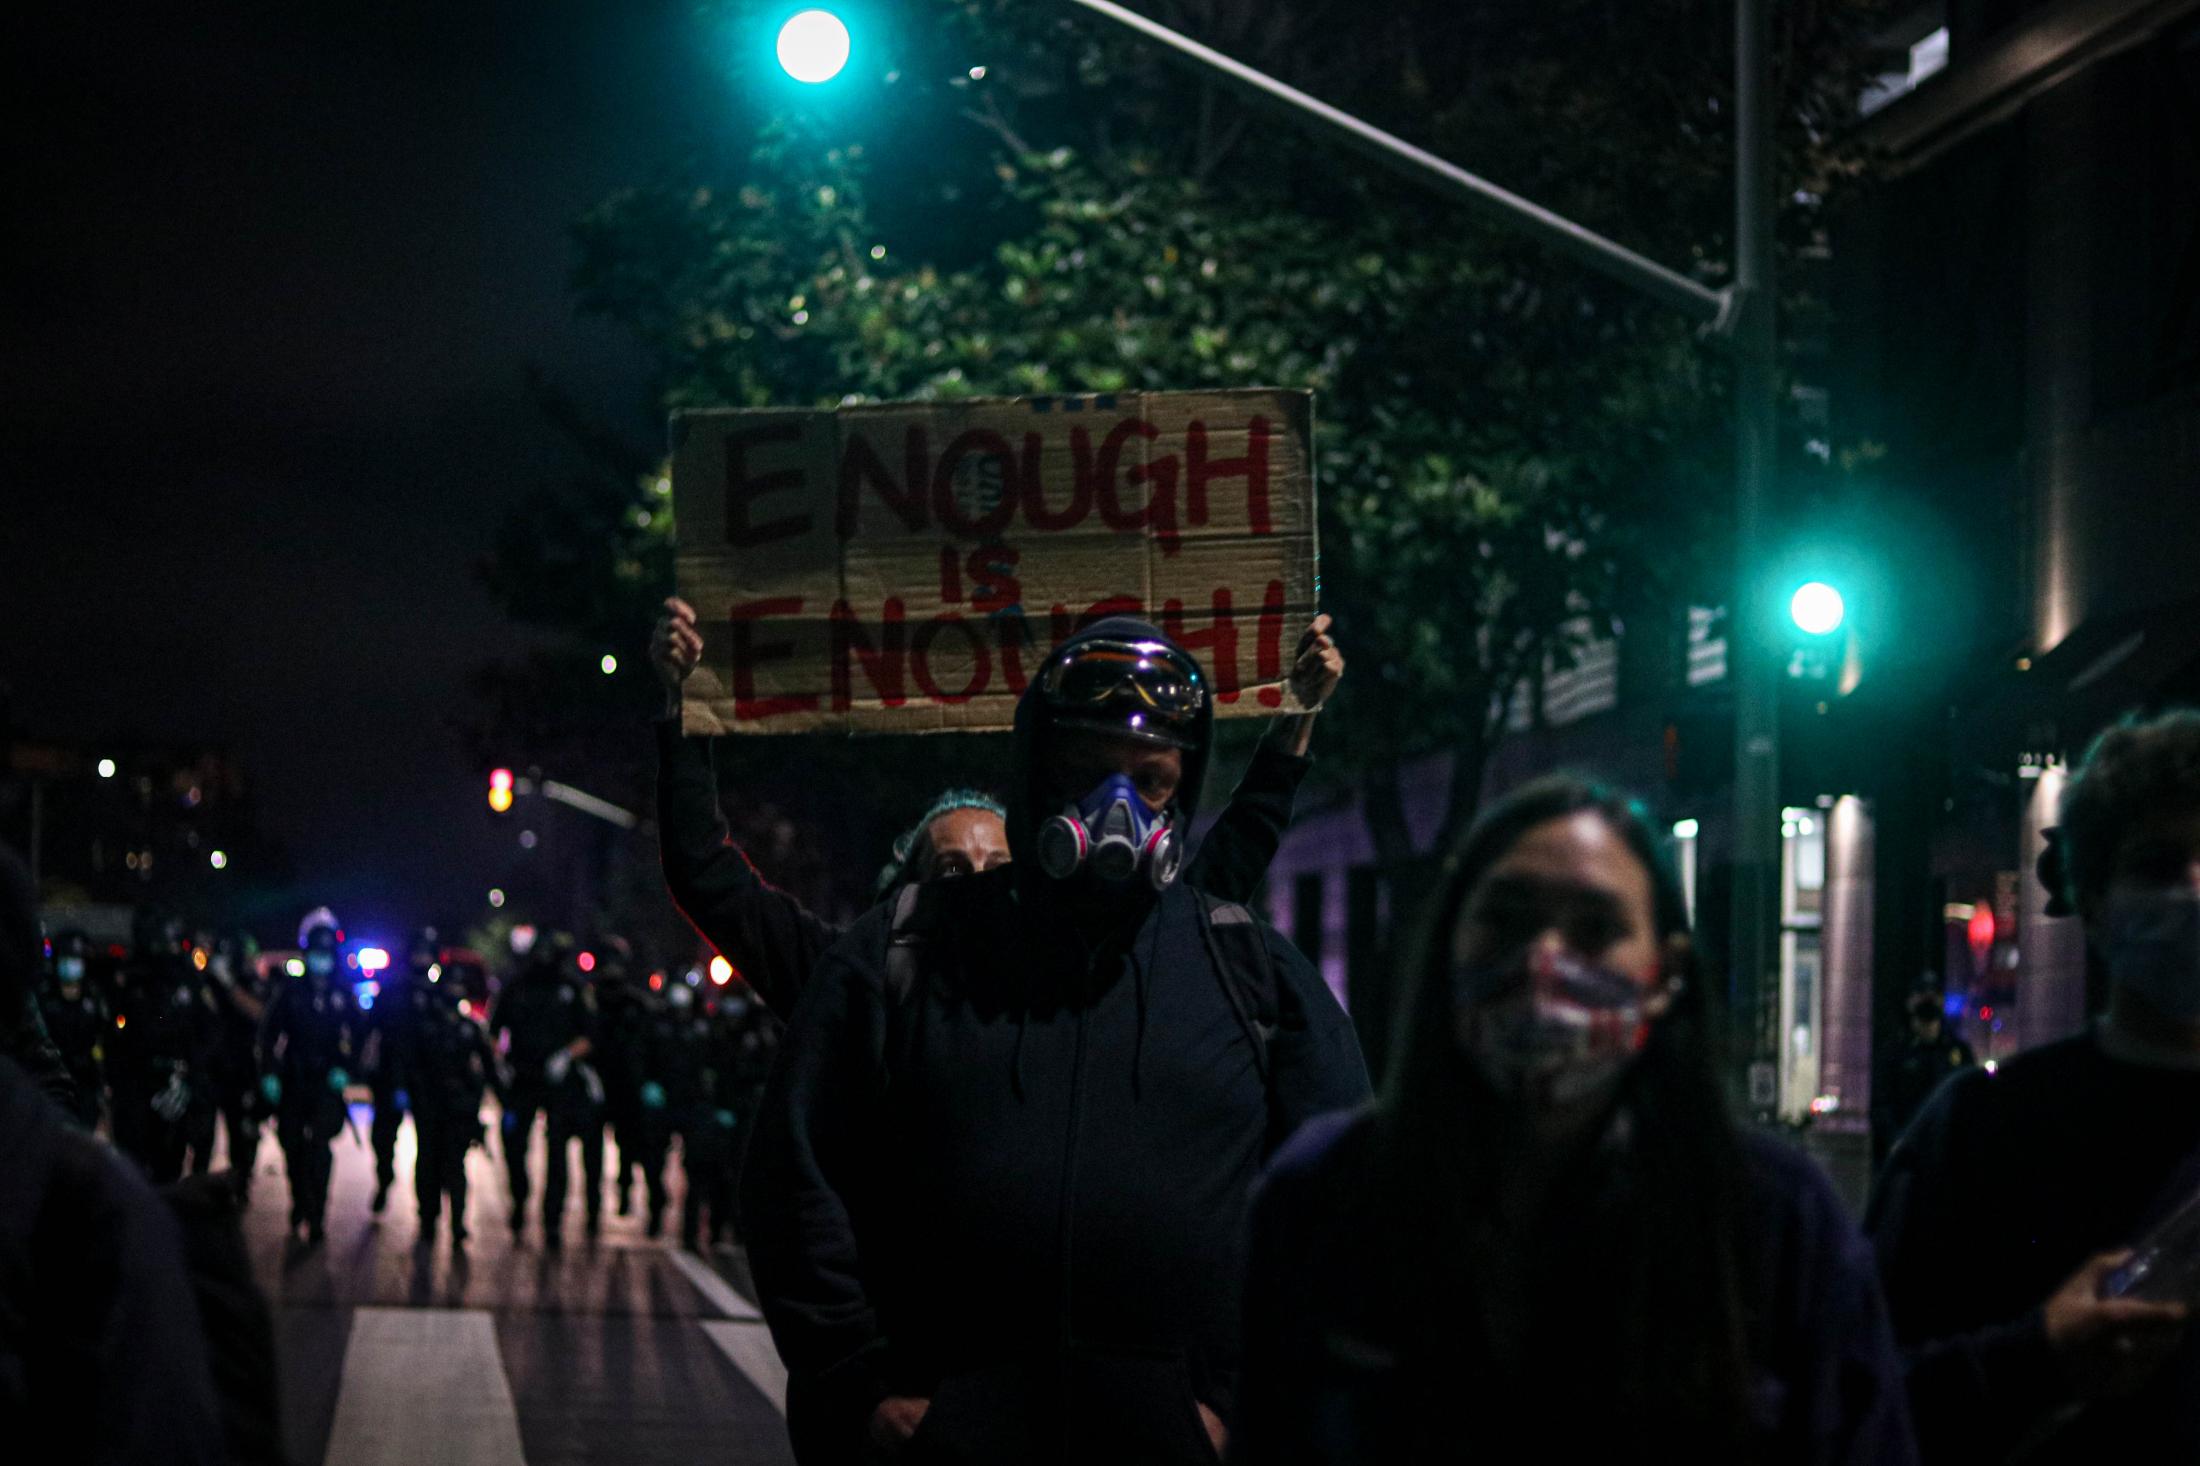 Protests - A protester holds up a sign that says "Enough is...